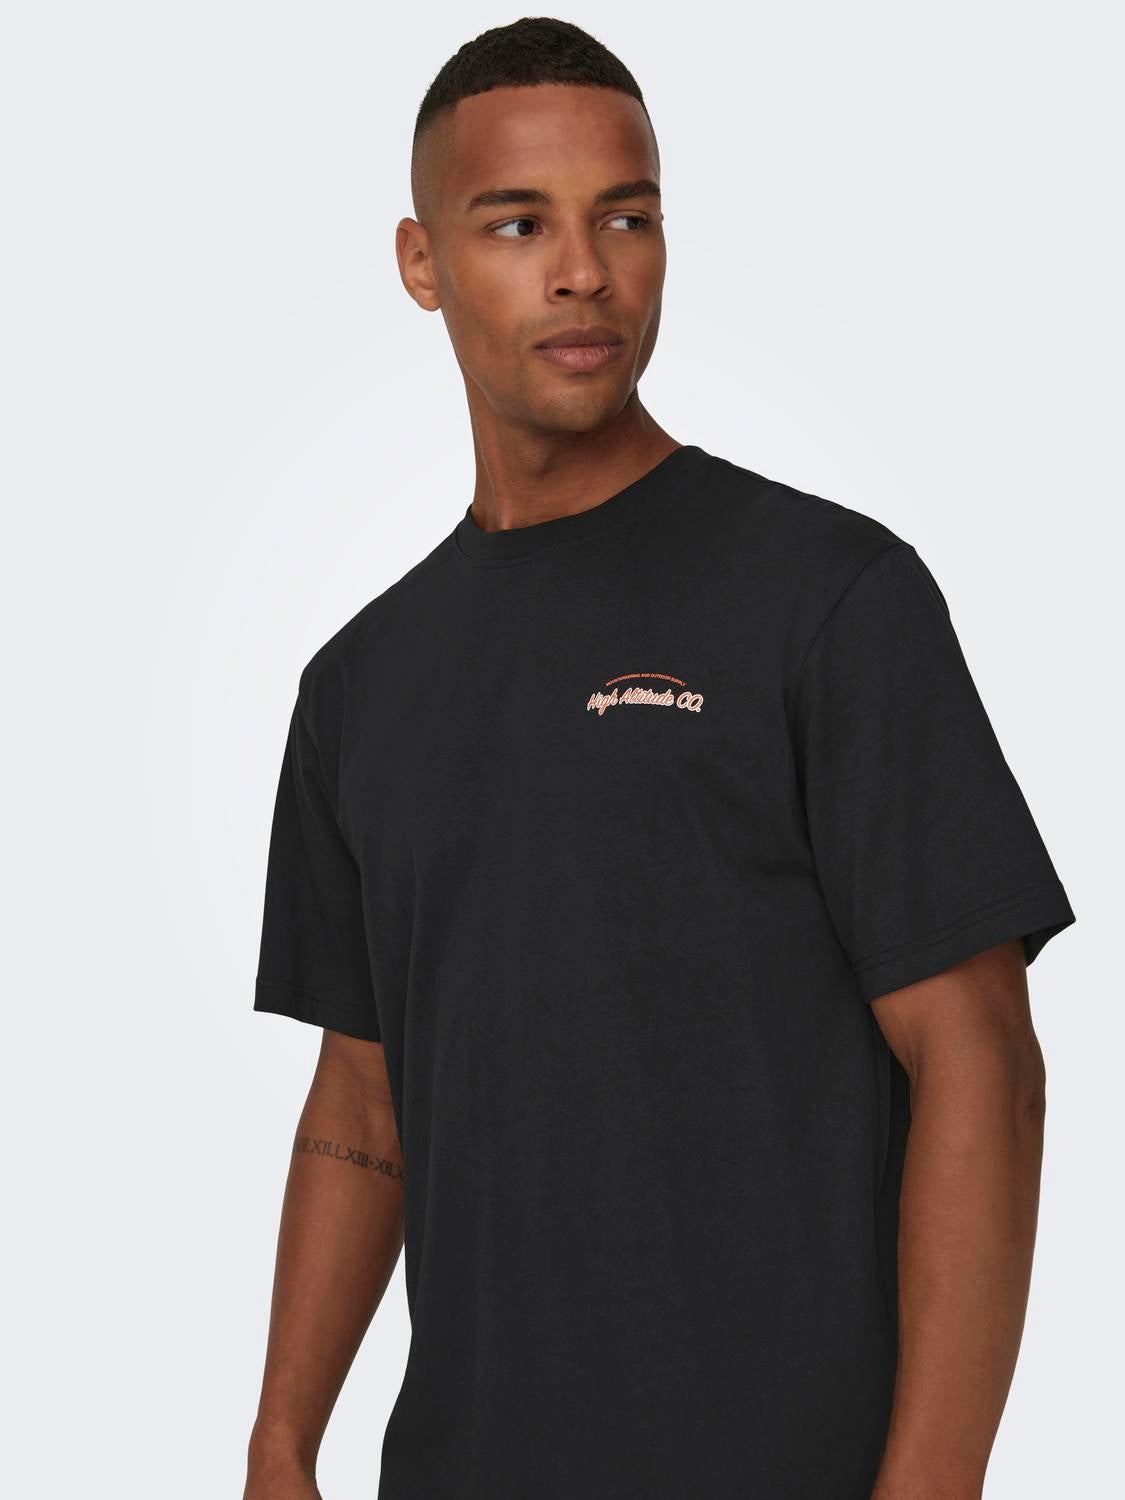 & O-Neck | Black sleeves Fit | SONS® ONLY Box T-Shirt Relaxed